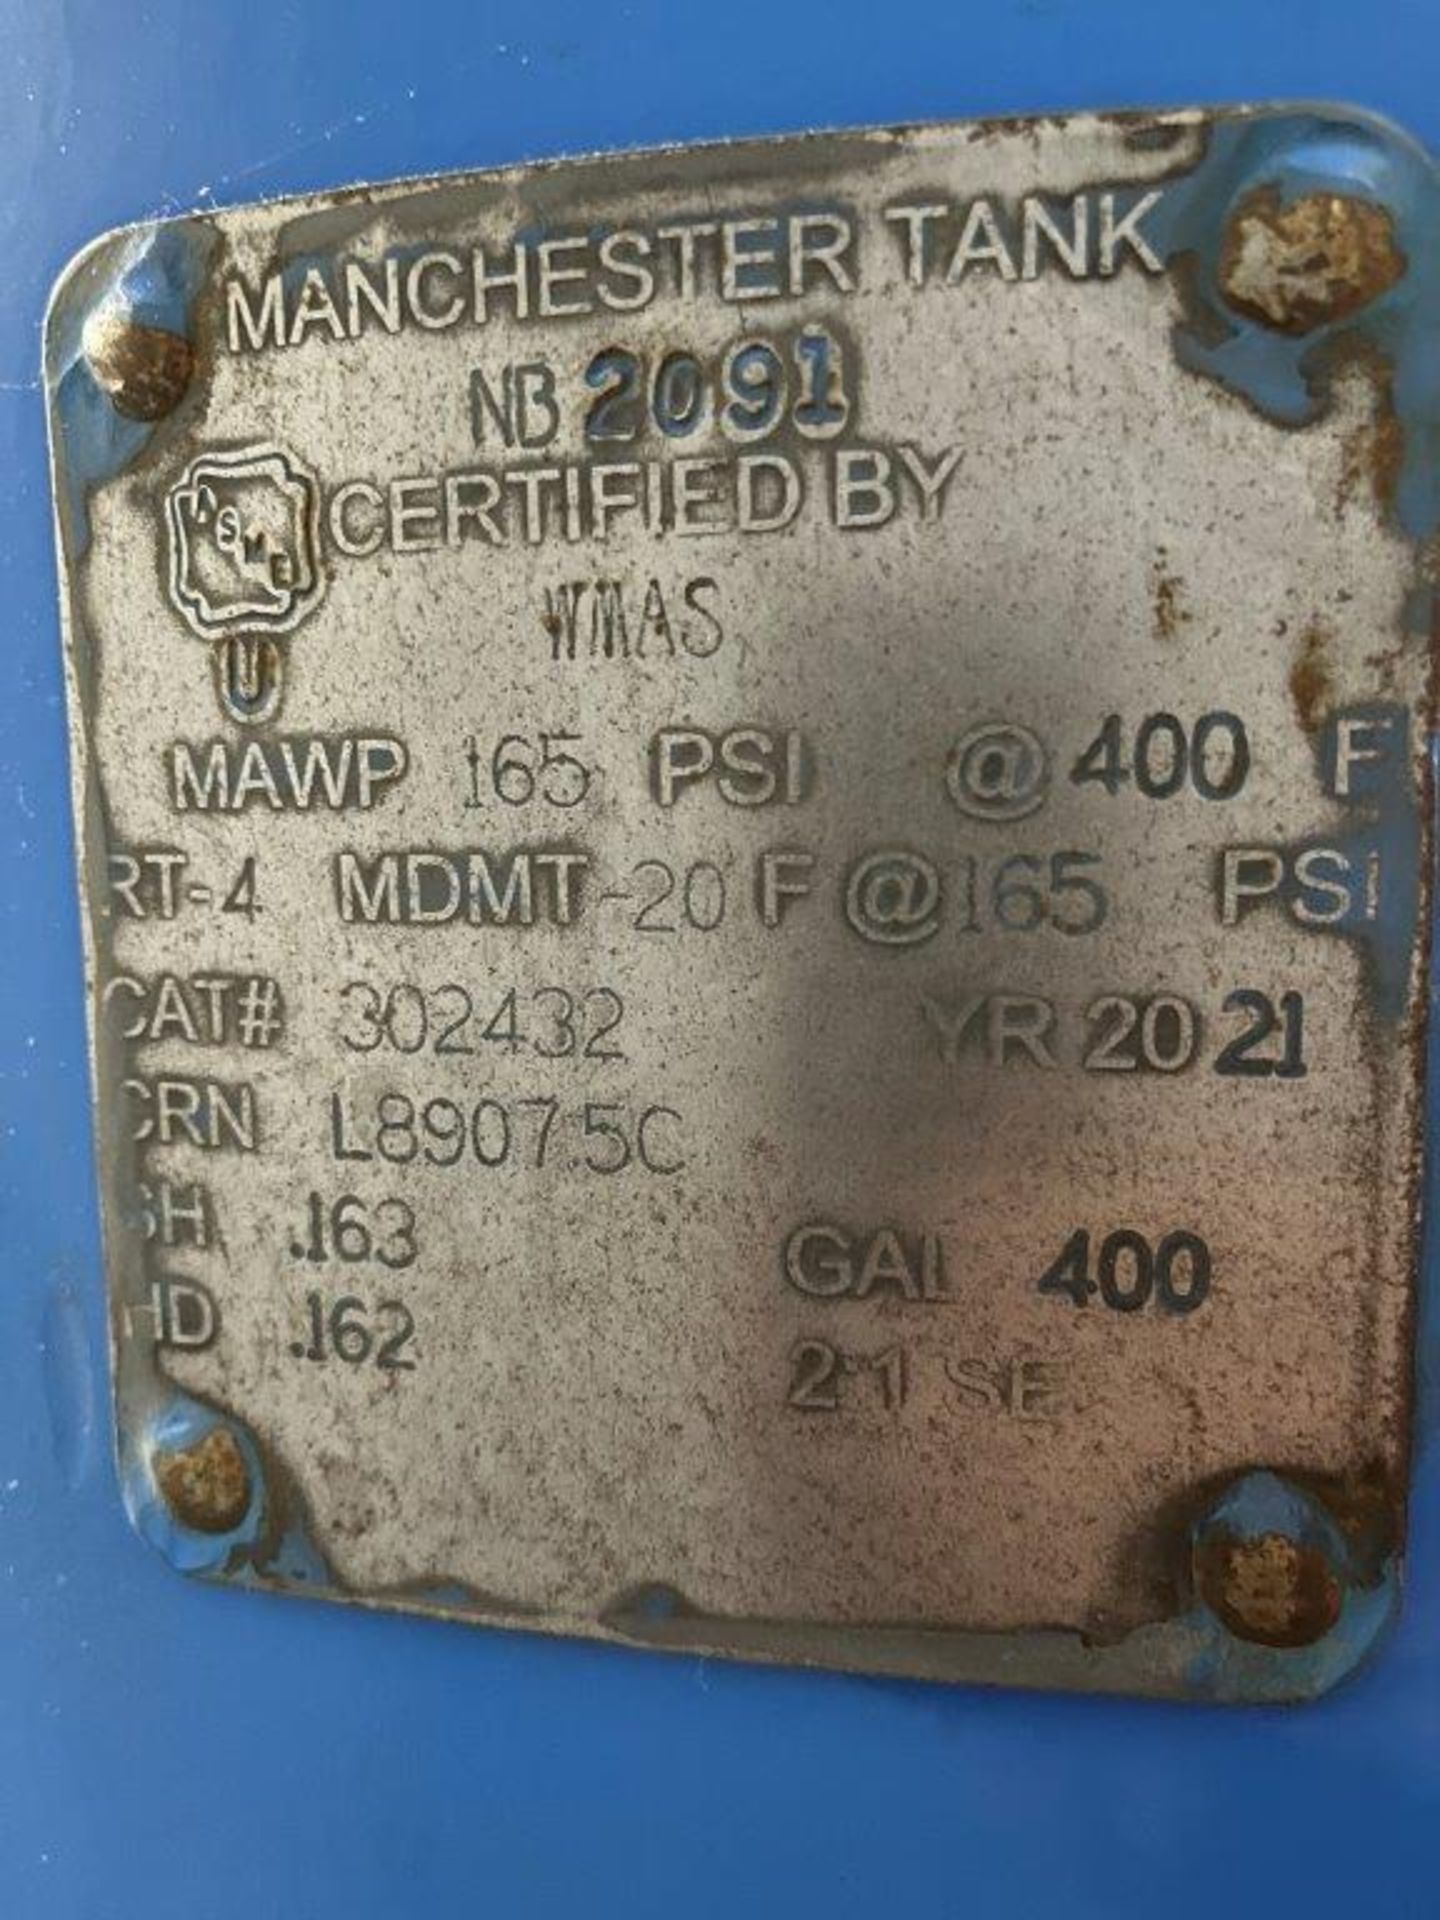 Manchester Tank Compressed Air Tank 400 Gal. - Image 2 of 2